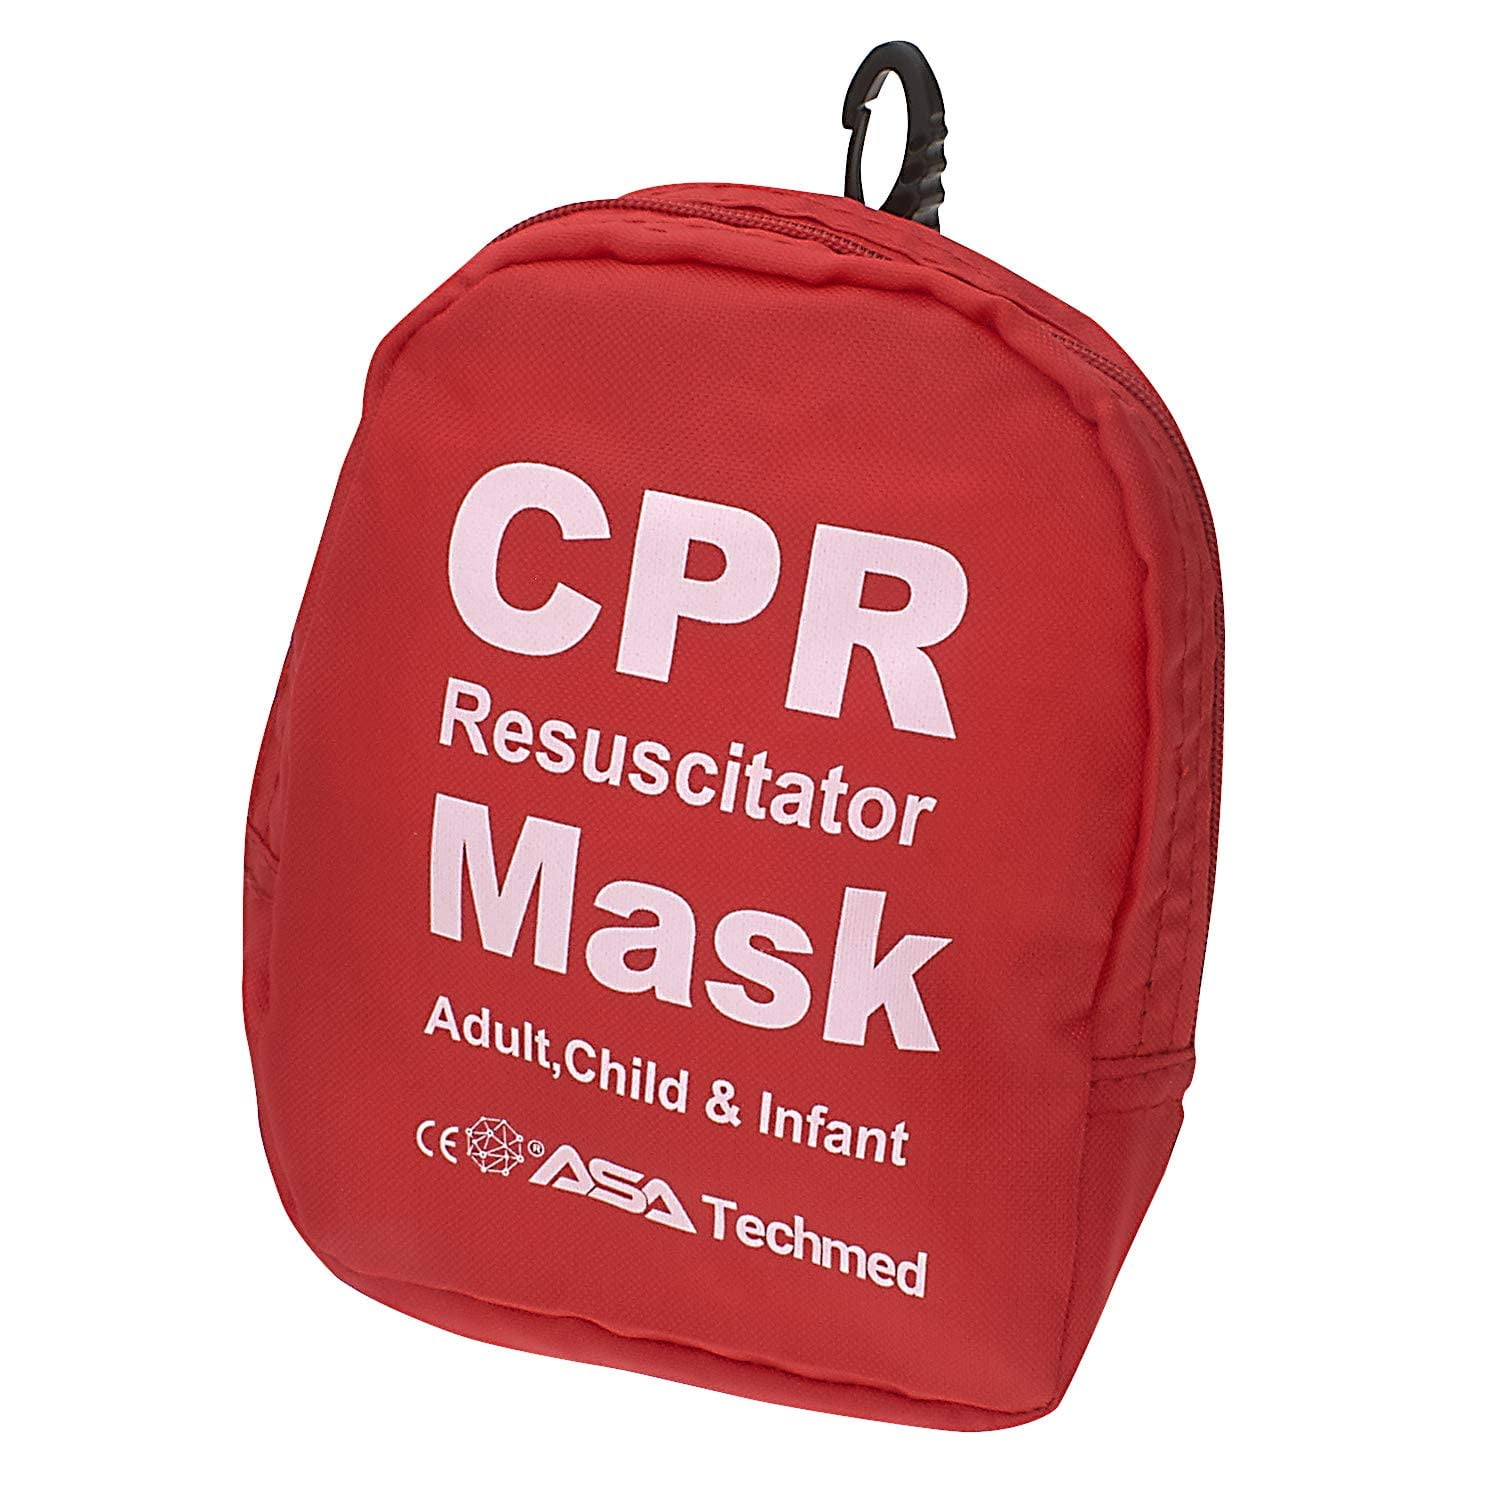 Code 1 Adult/Child & Infant CPR Mask in Soft Case – RED-6075